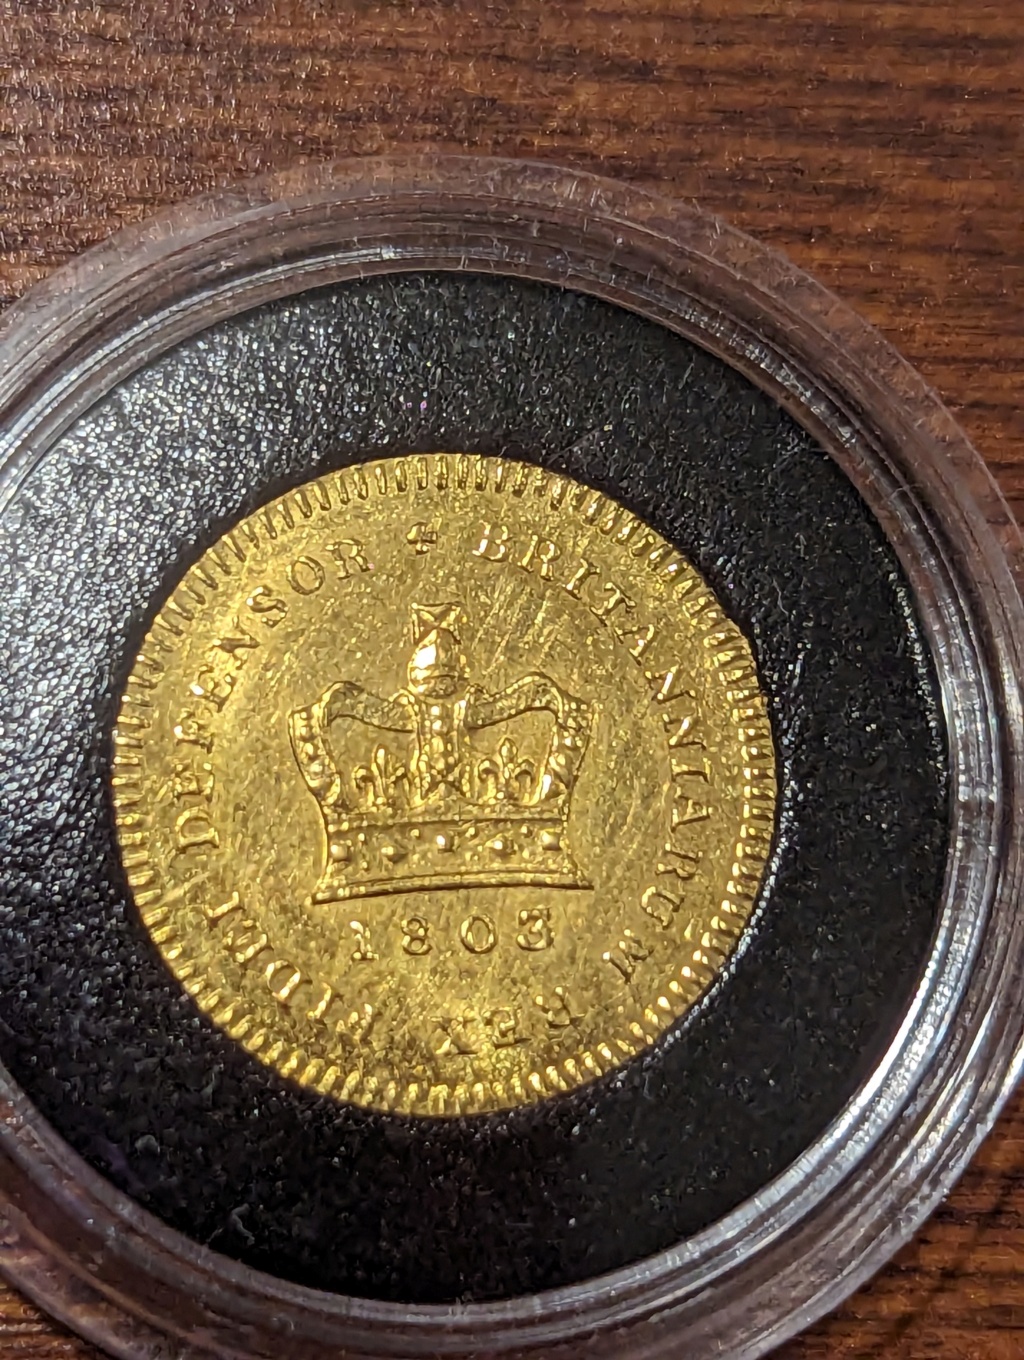 And a few more sovereigns Pxl_2136